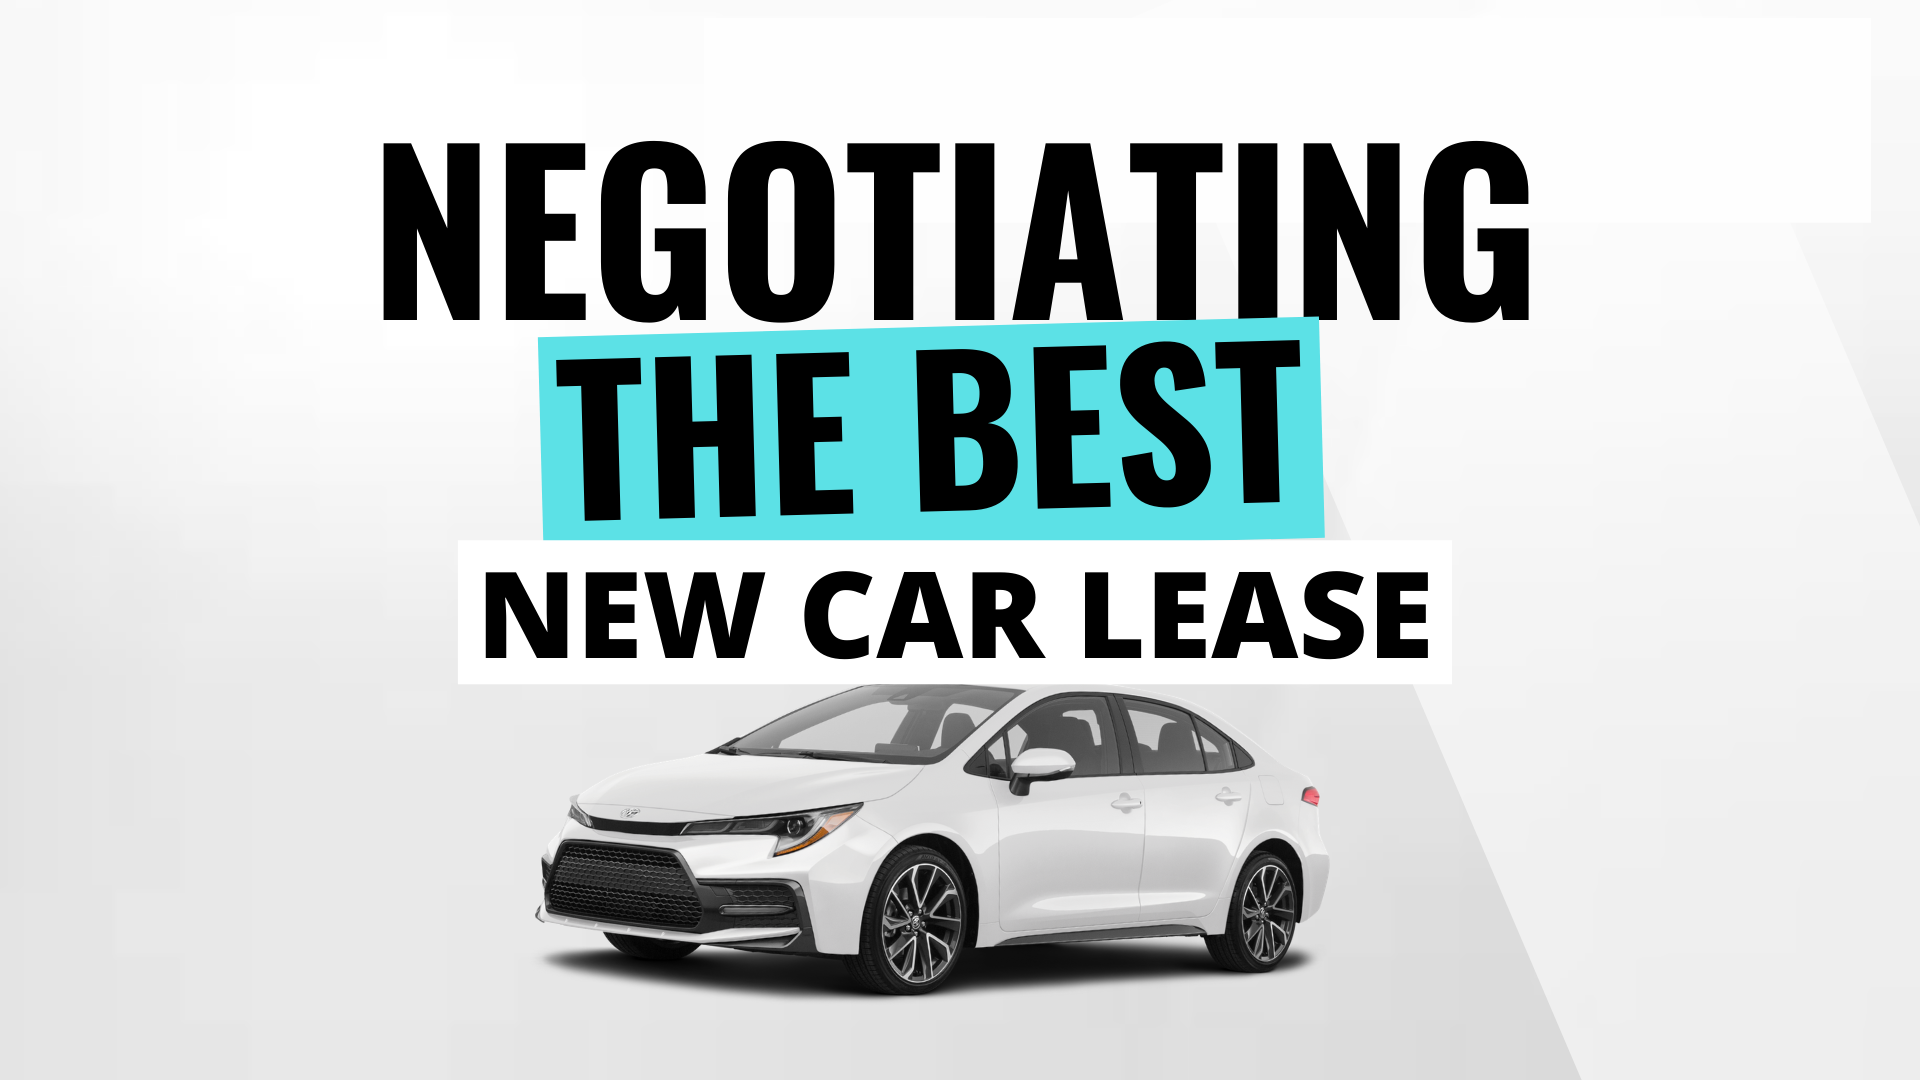 How to Negotiate The Best Lease Deal